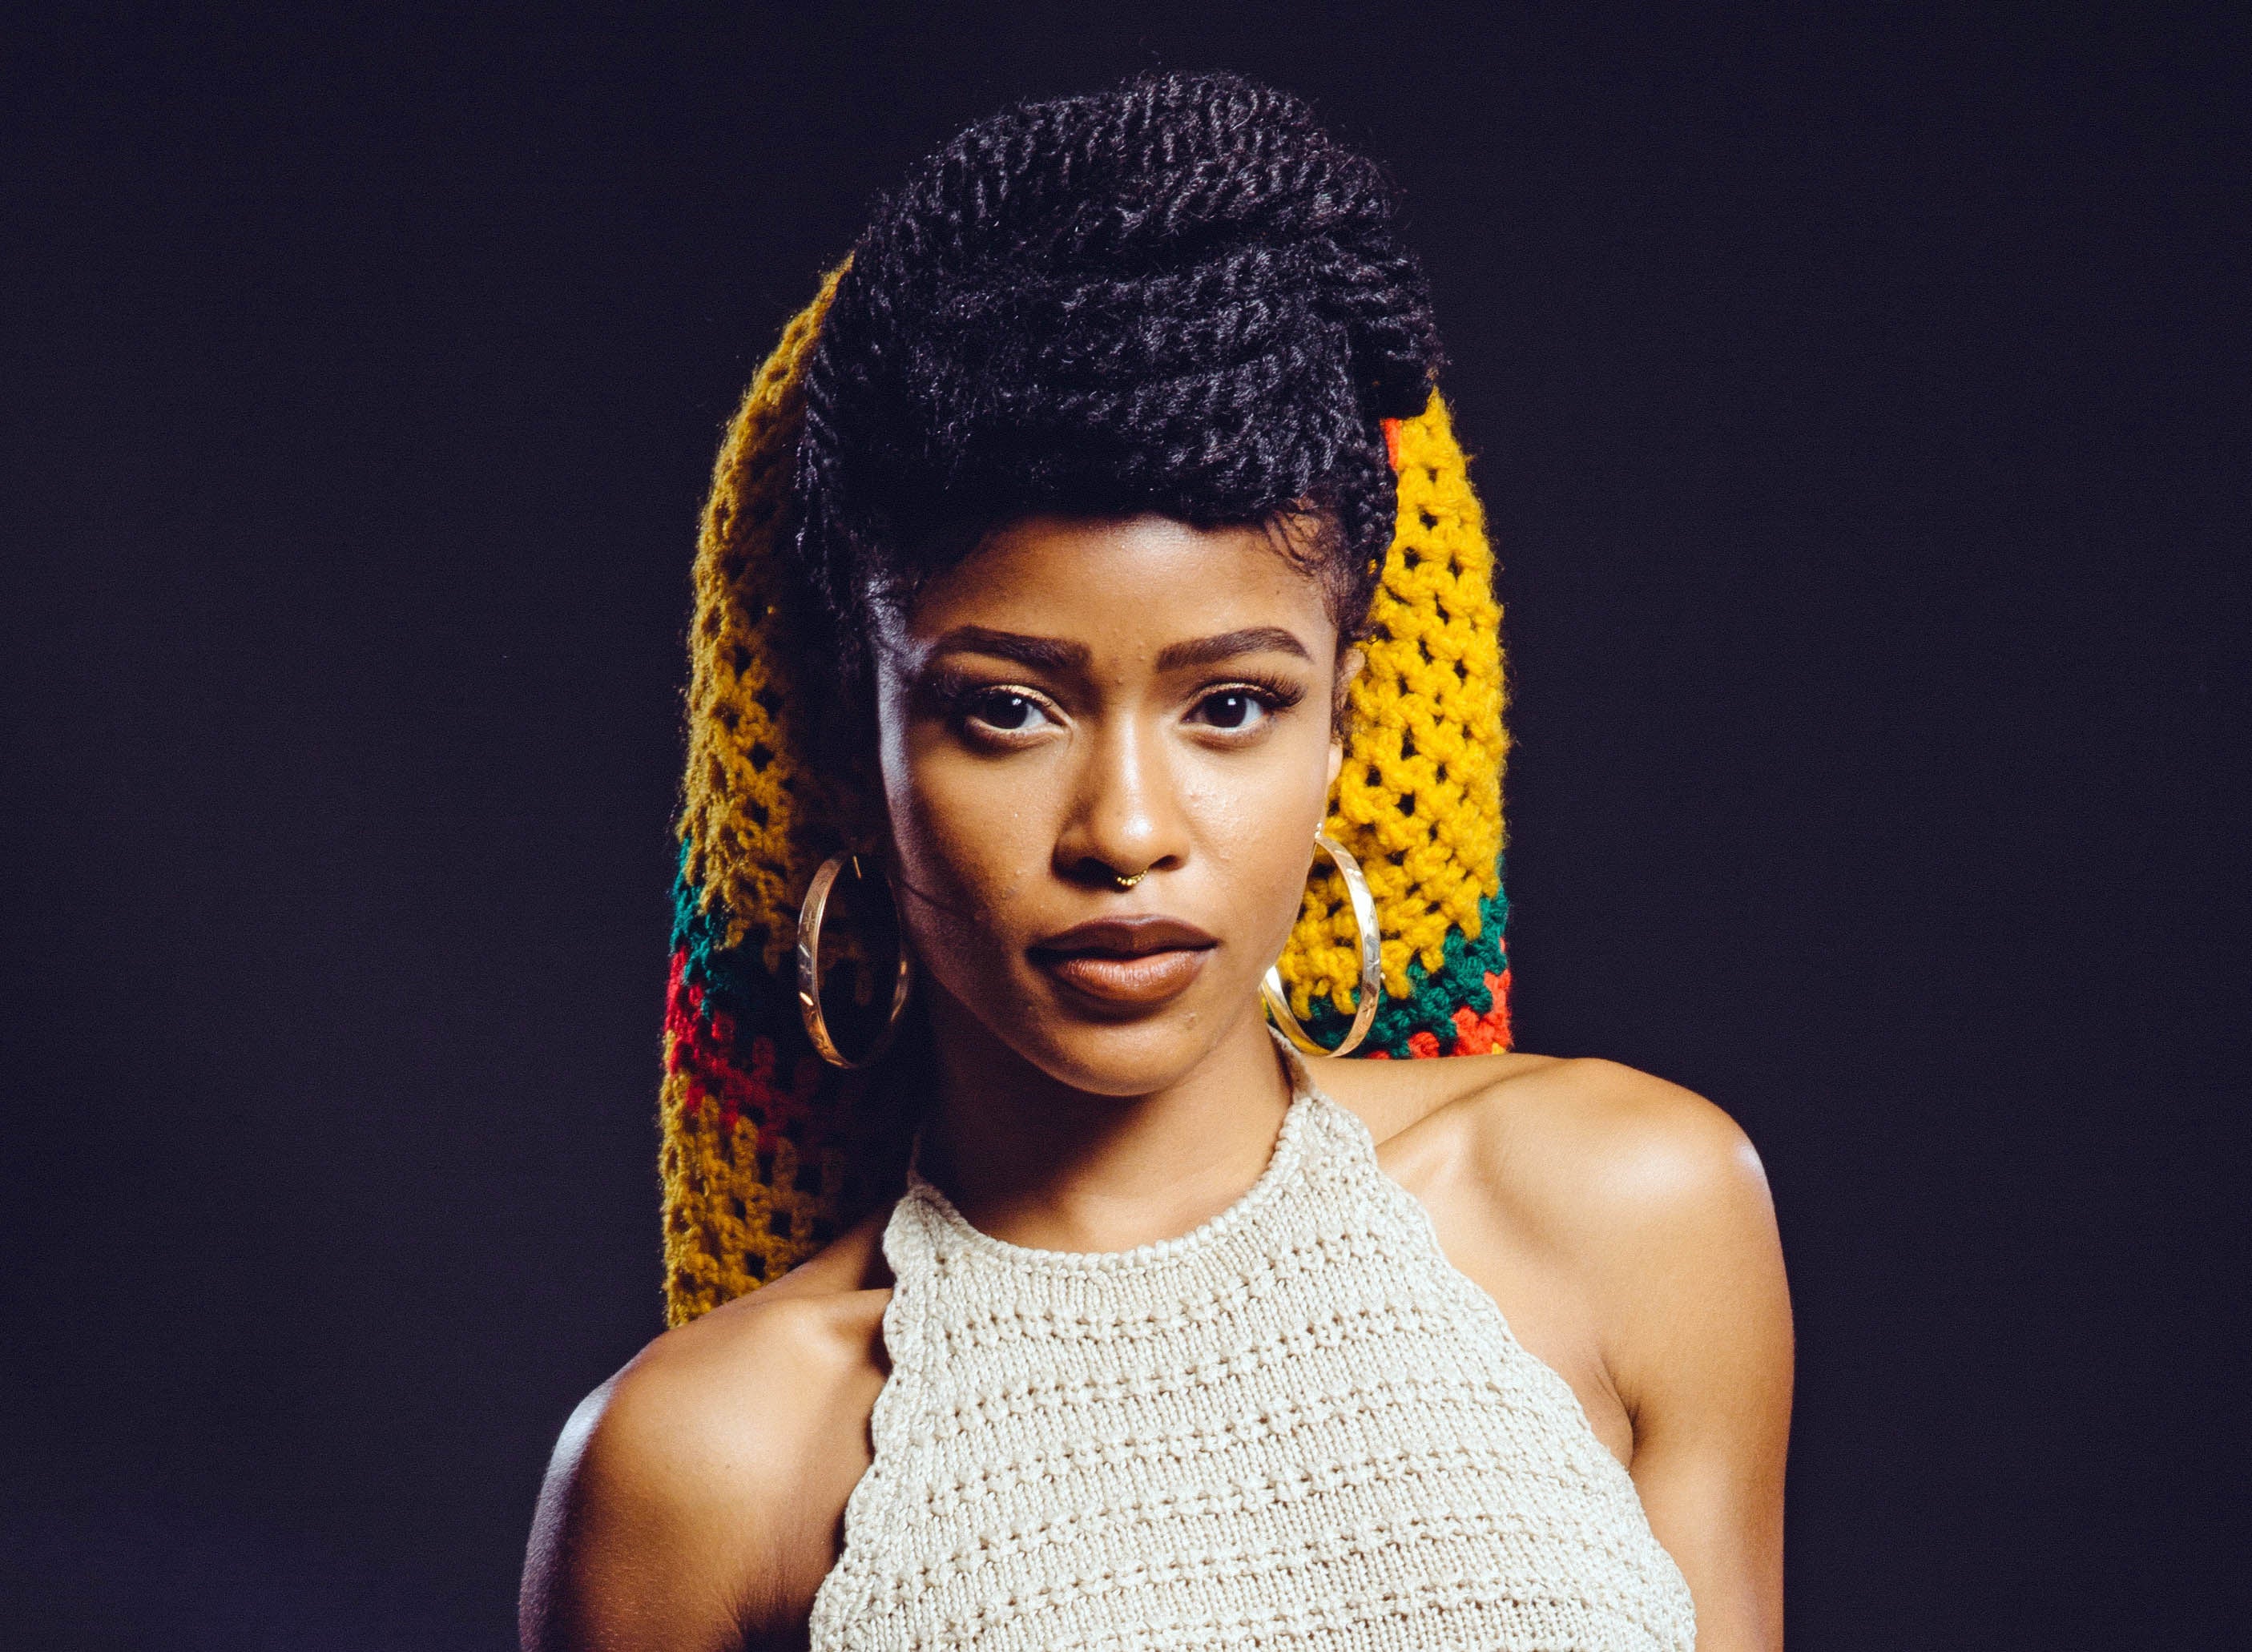 Singer Simone Battle was found in her home in LA on Friday